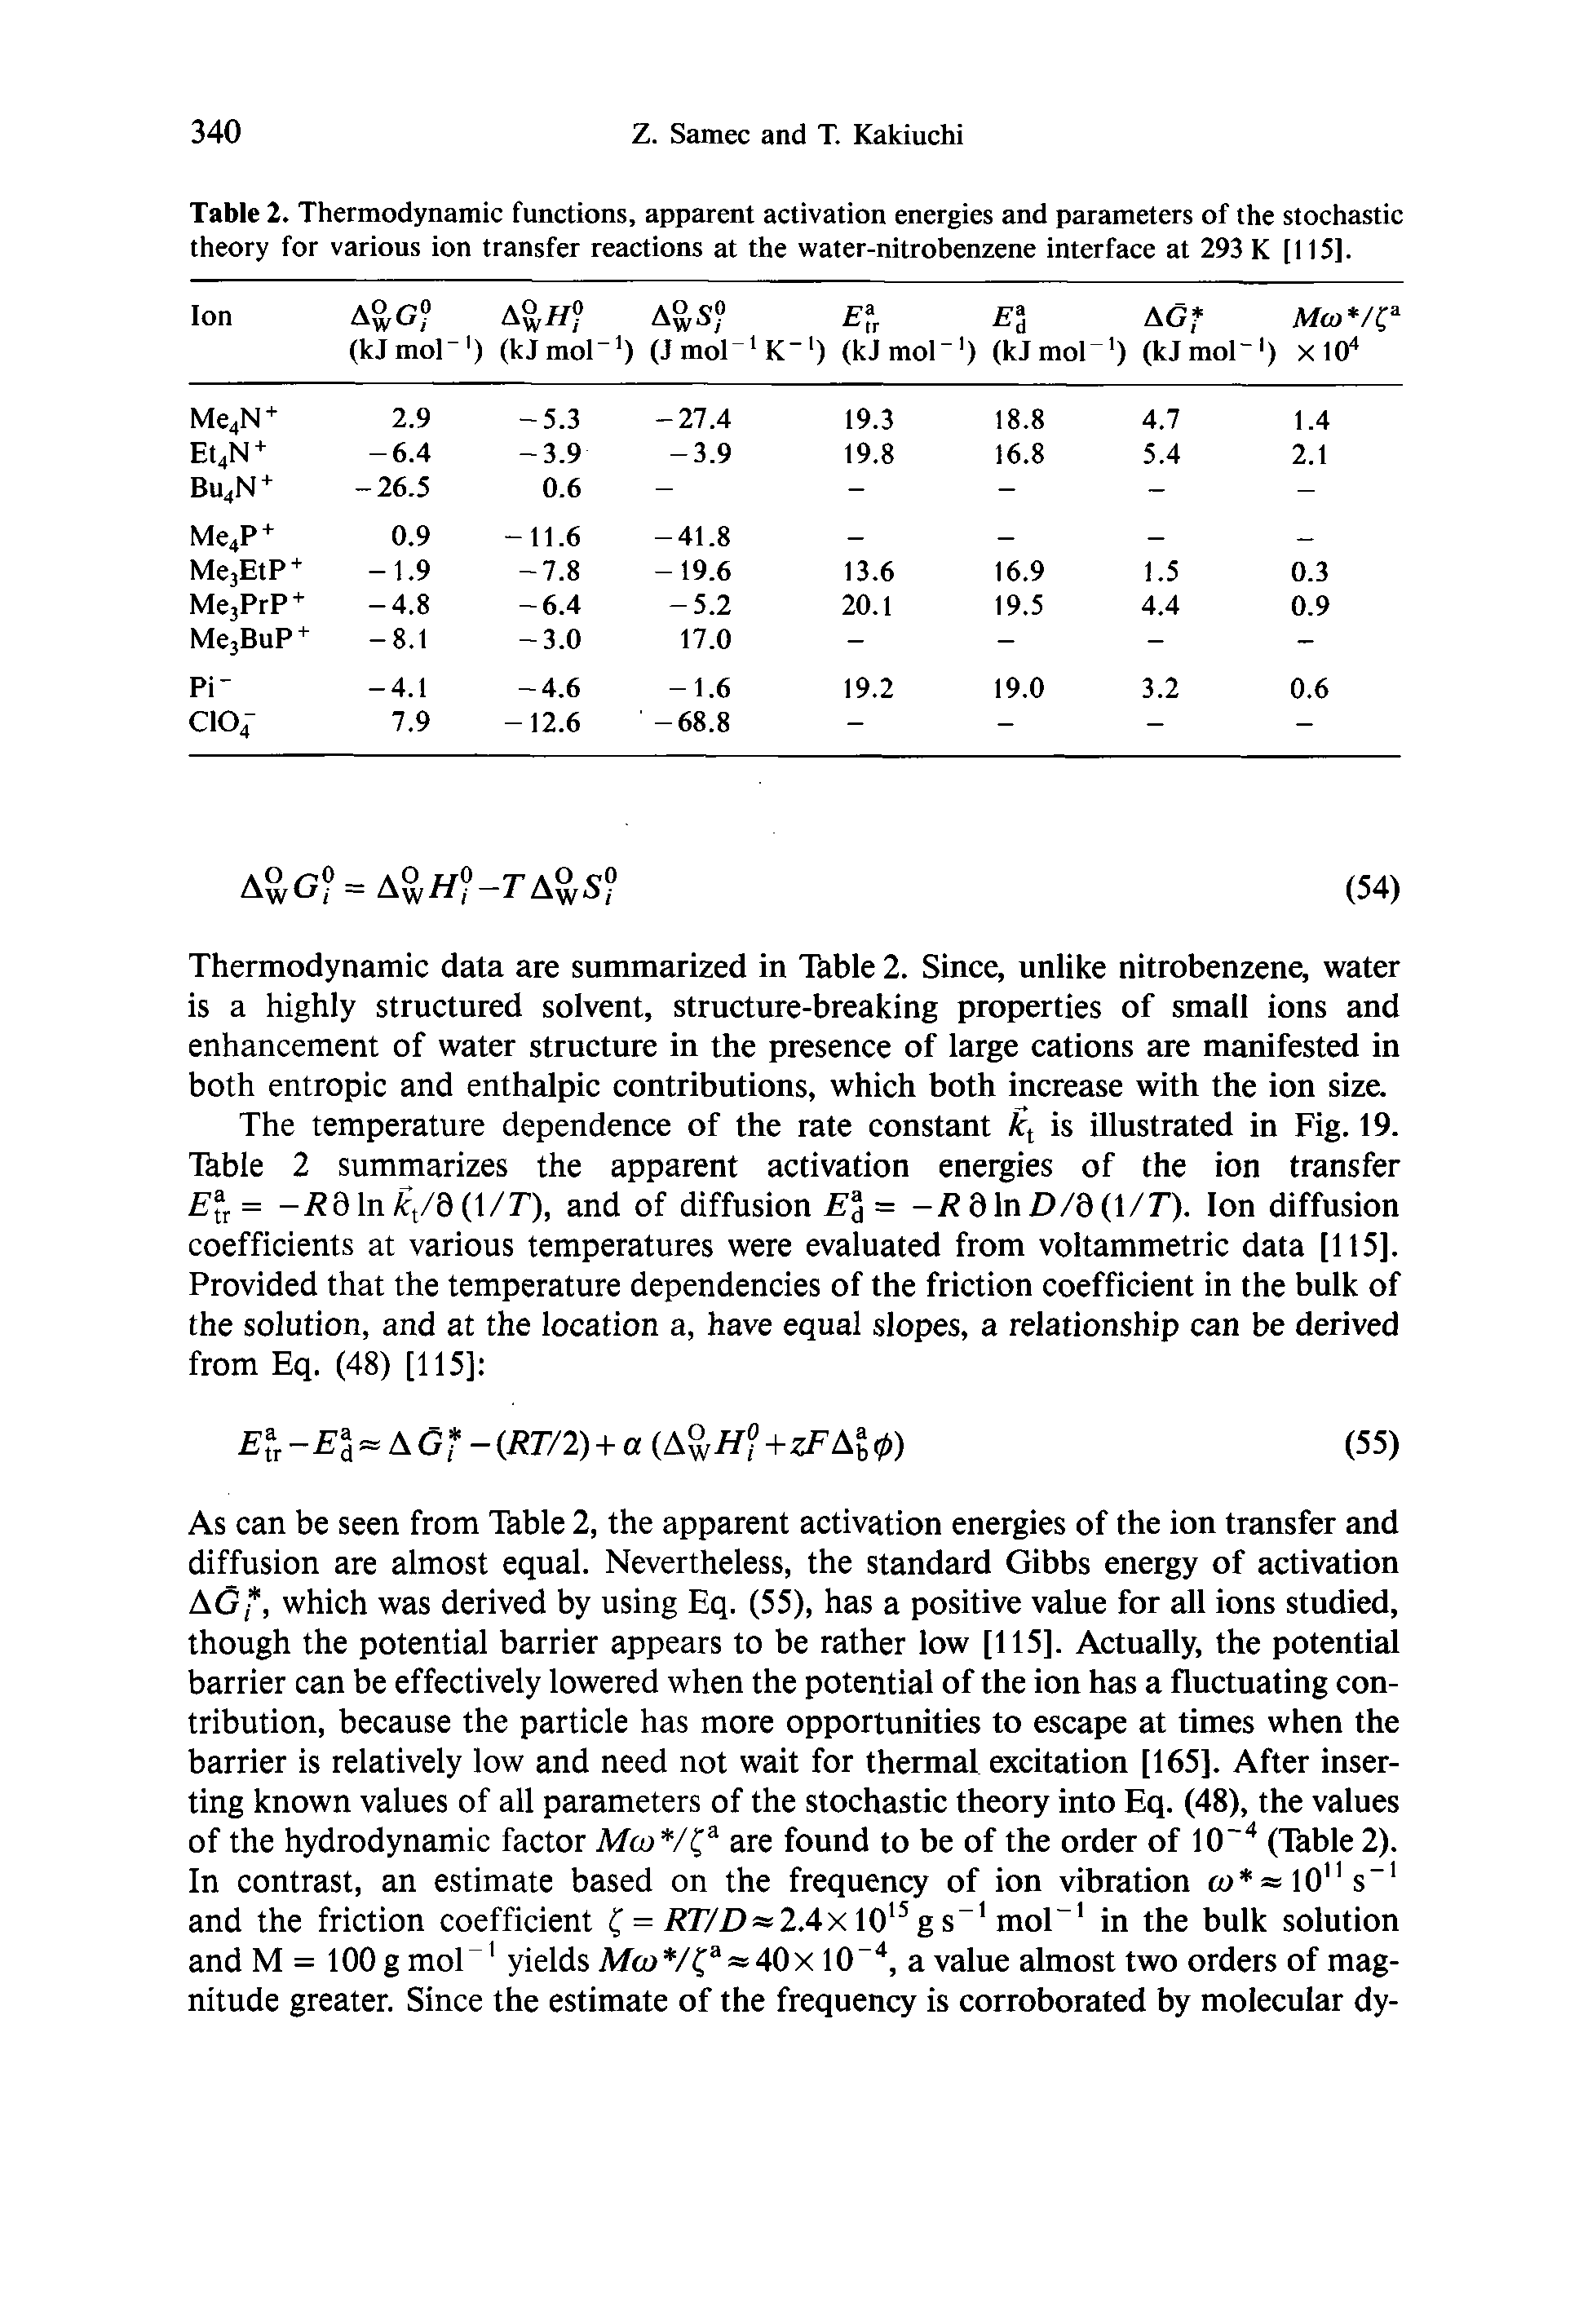 Table 2. Thermodynamic functions, apparent activation energies and parameters of the stochastic theory for various ion transfer reactions at the water-nitrobenzene interface at 293 K [115].